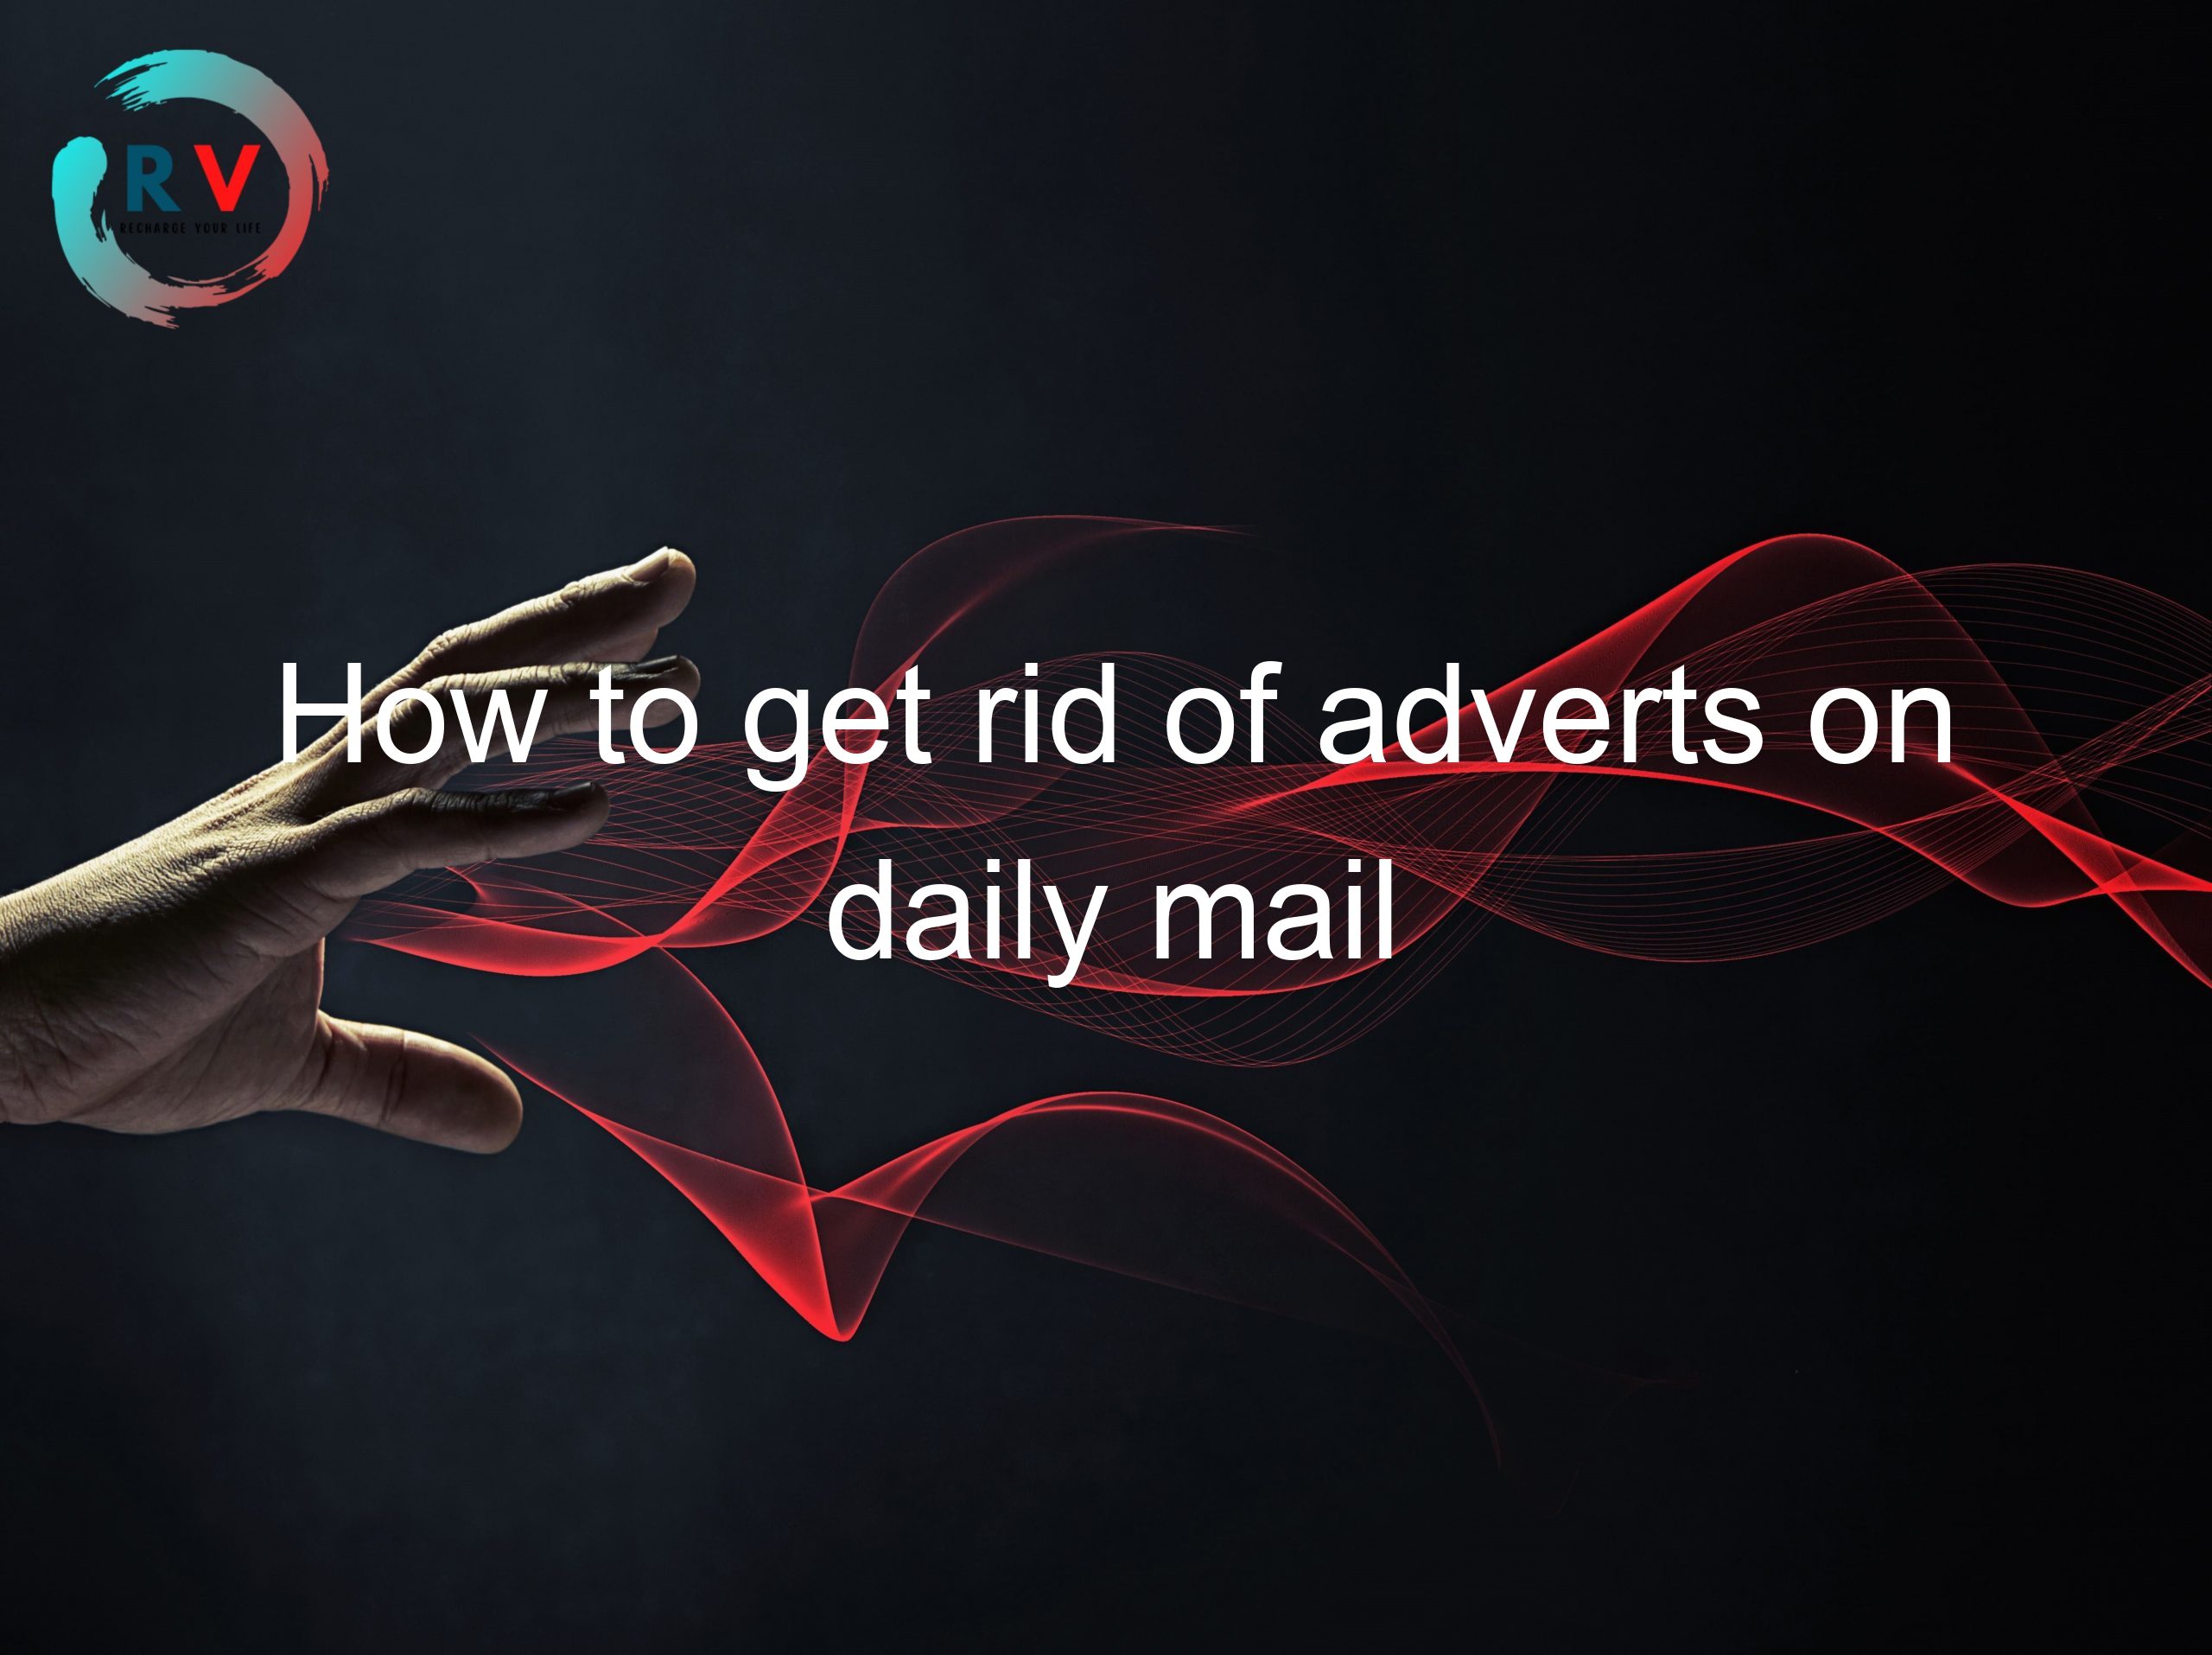 How to get rid of adverts on daily mail